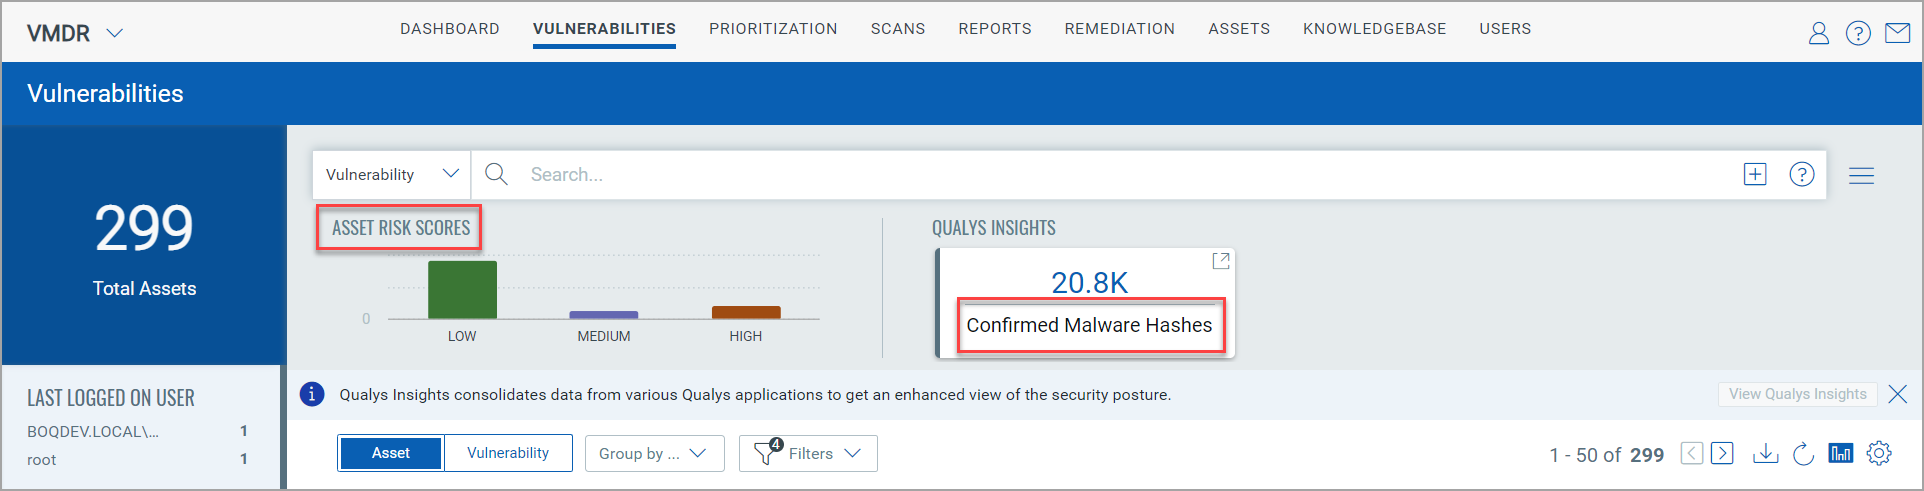 Asset Risk Score and Confirmed Malware Hashes